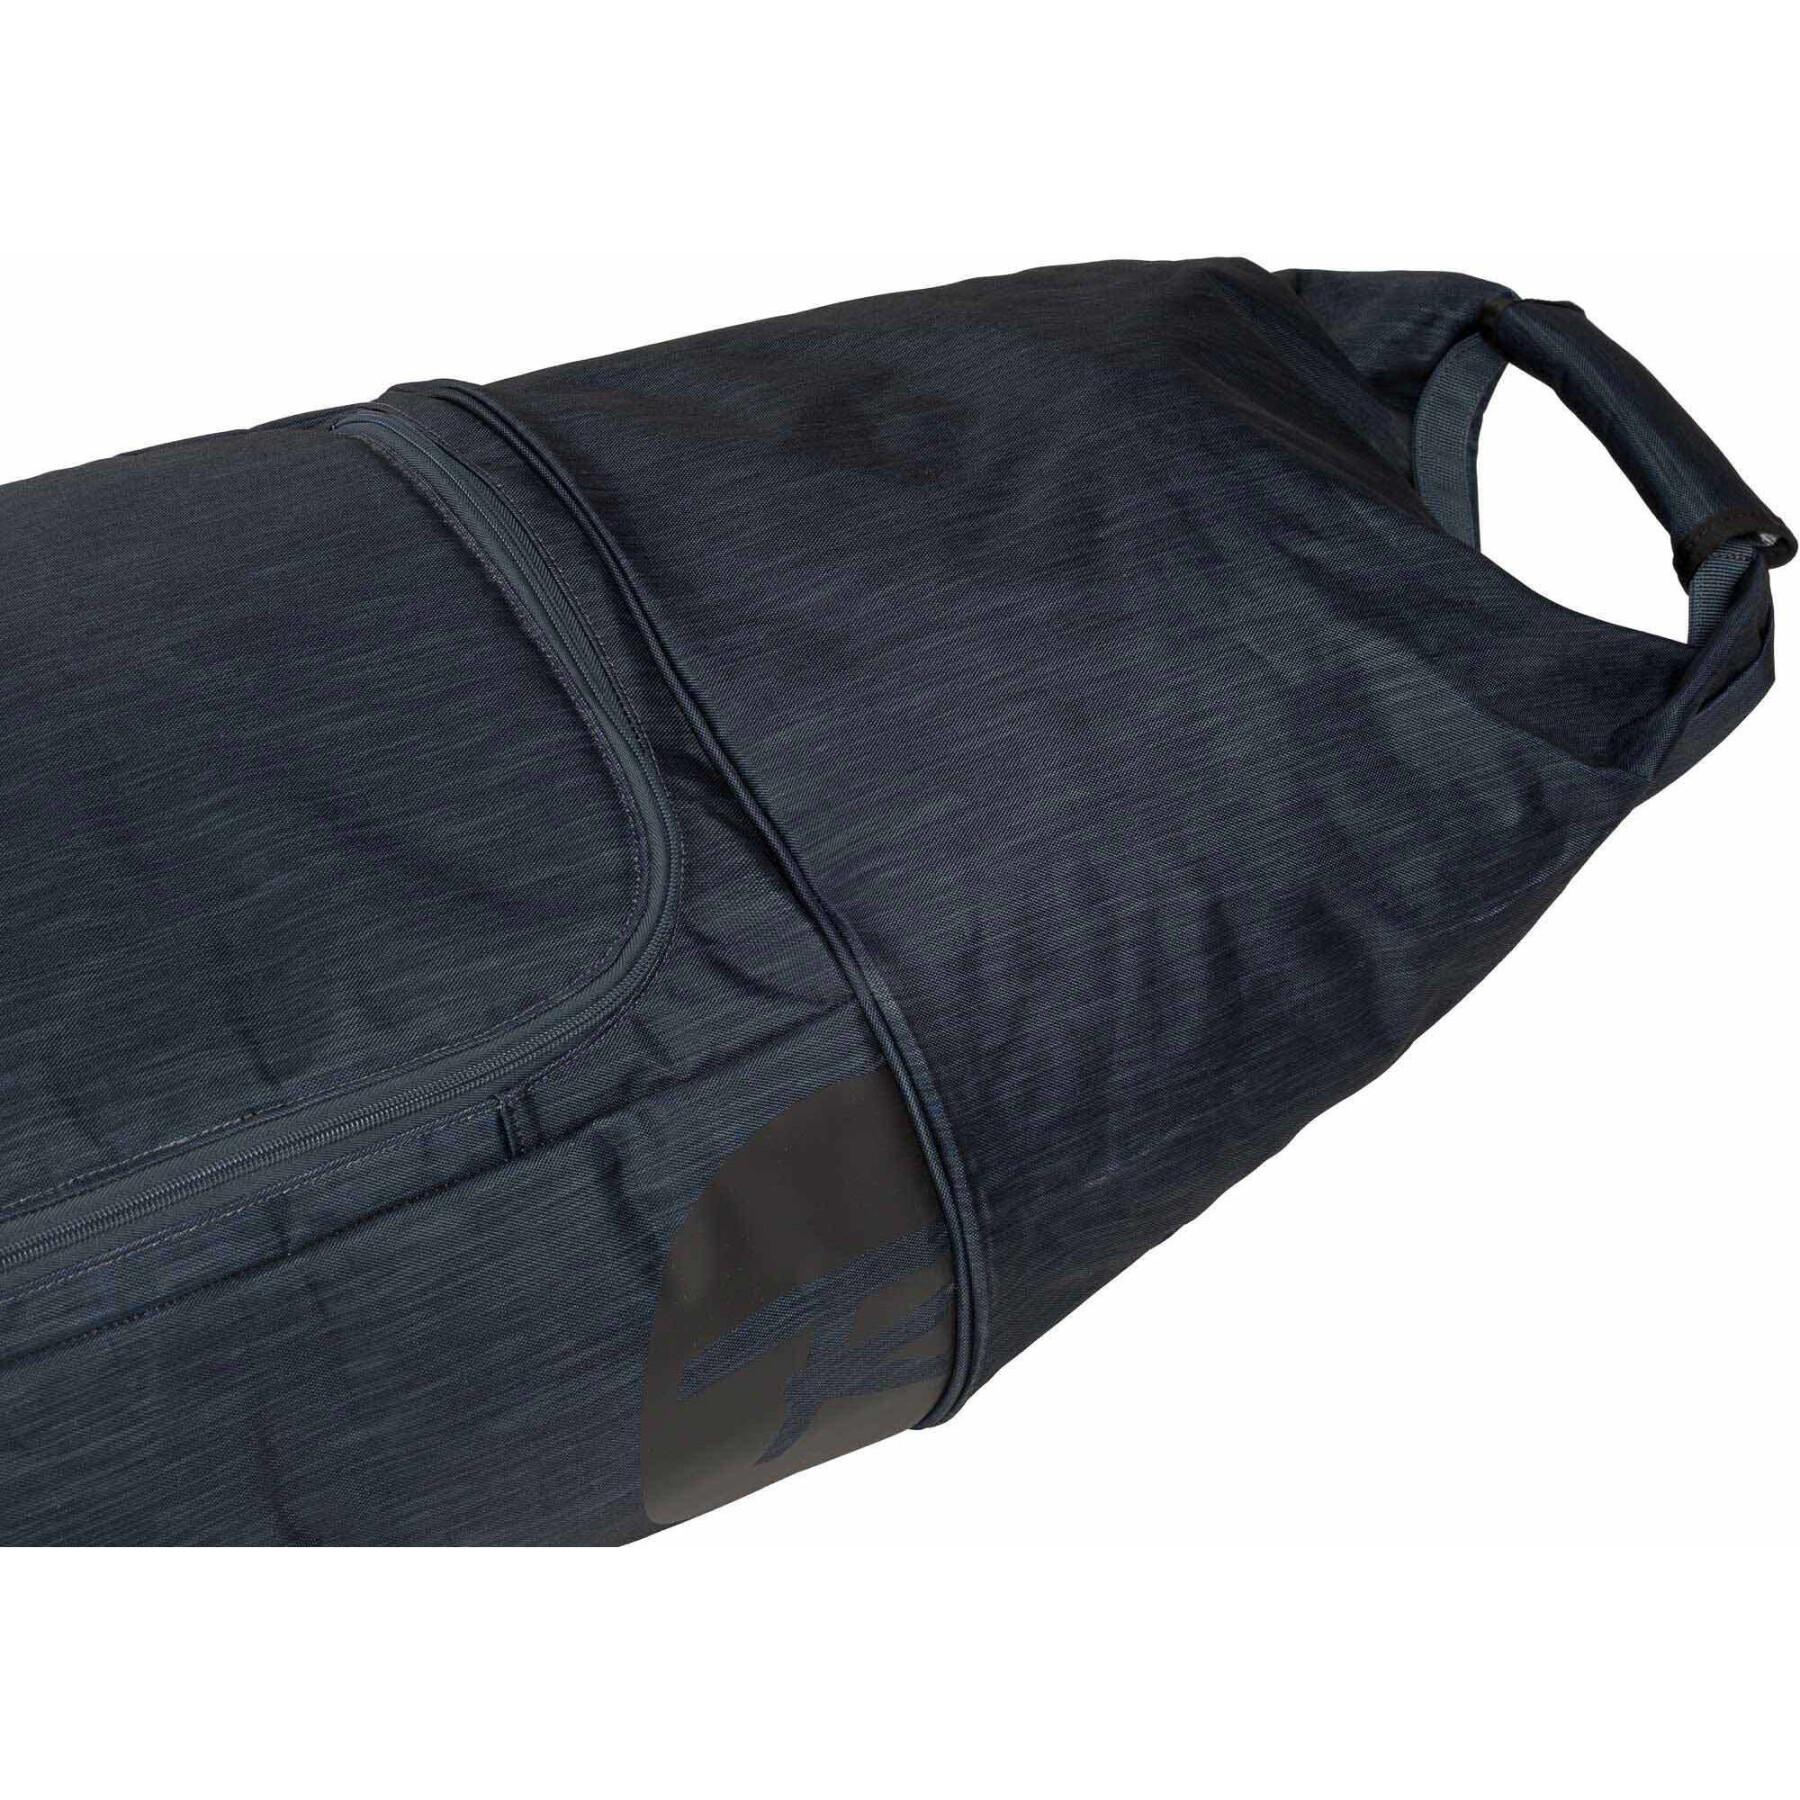 Torba na narty Rossignol Premium Ext 2P Padded 170-210